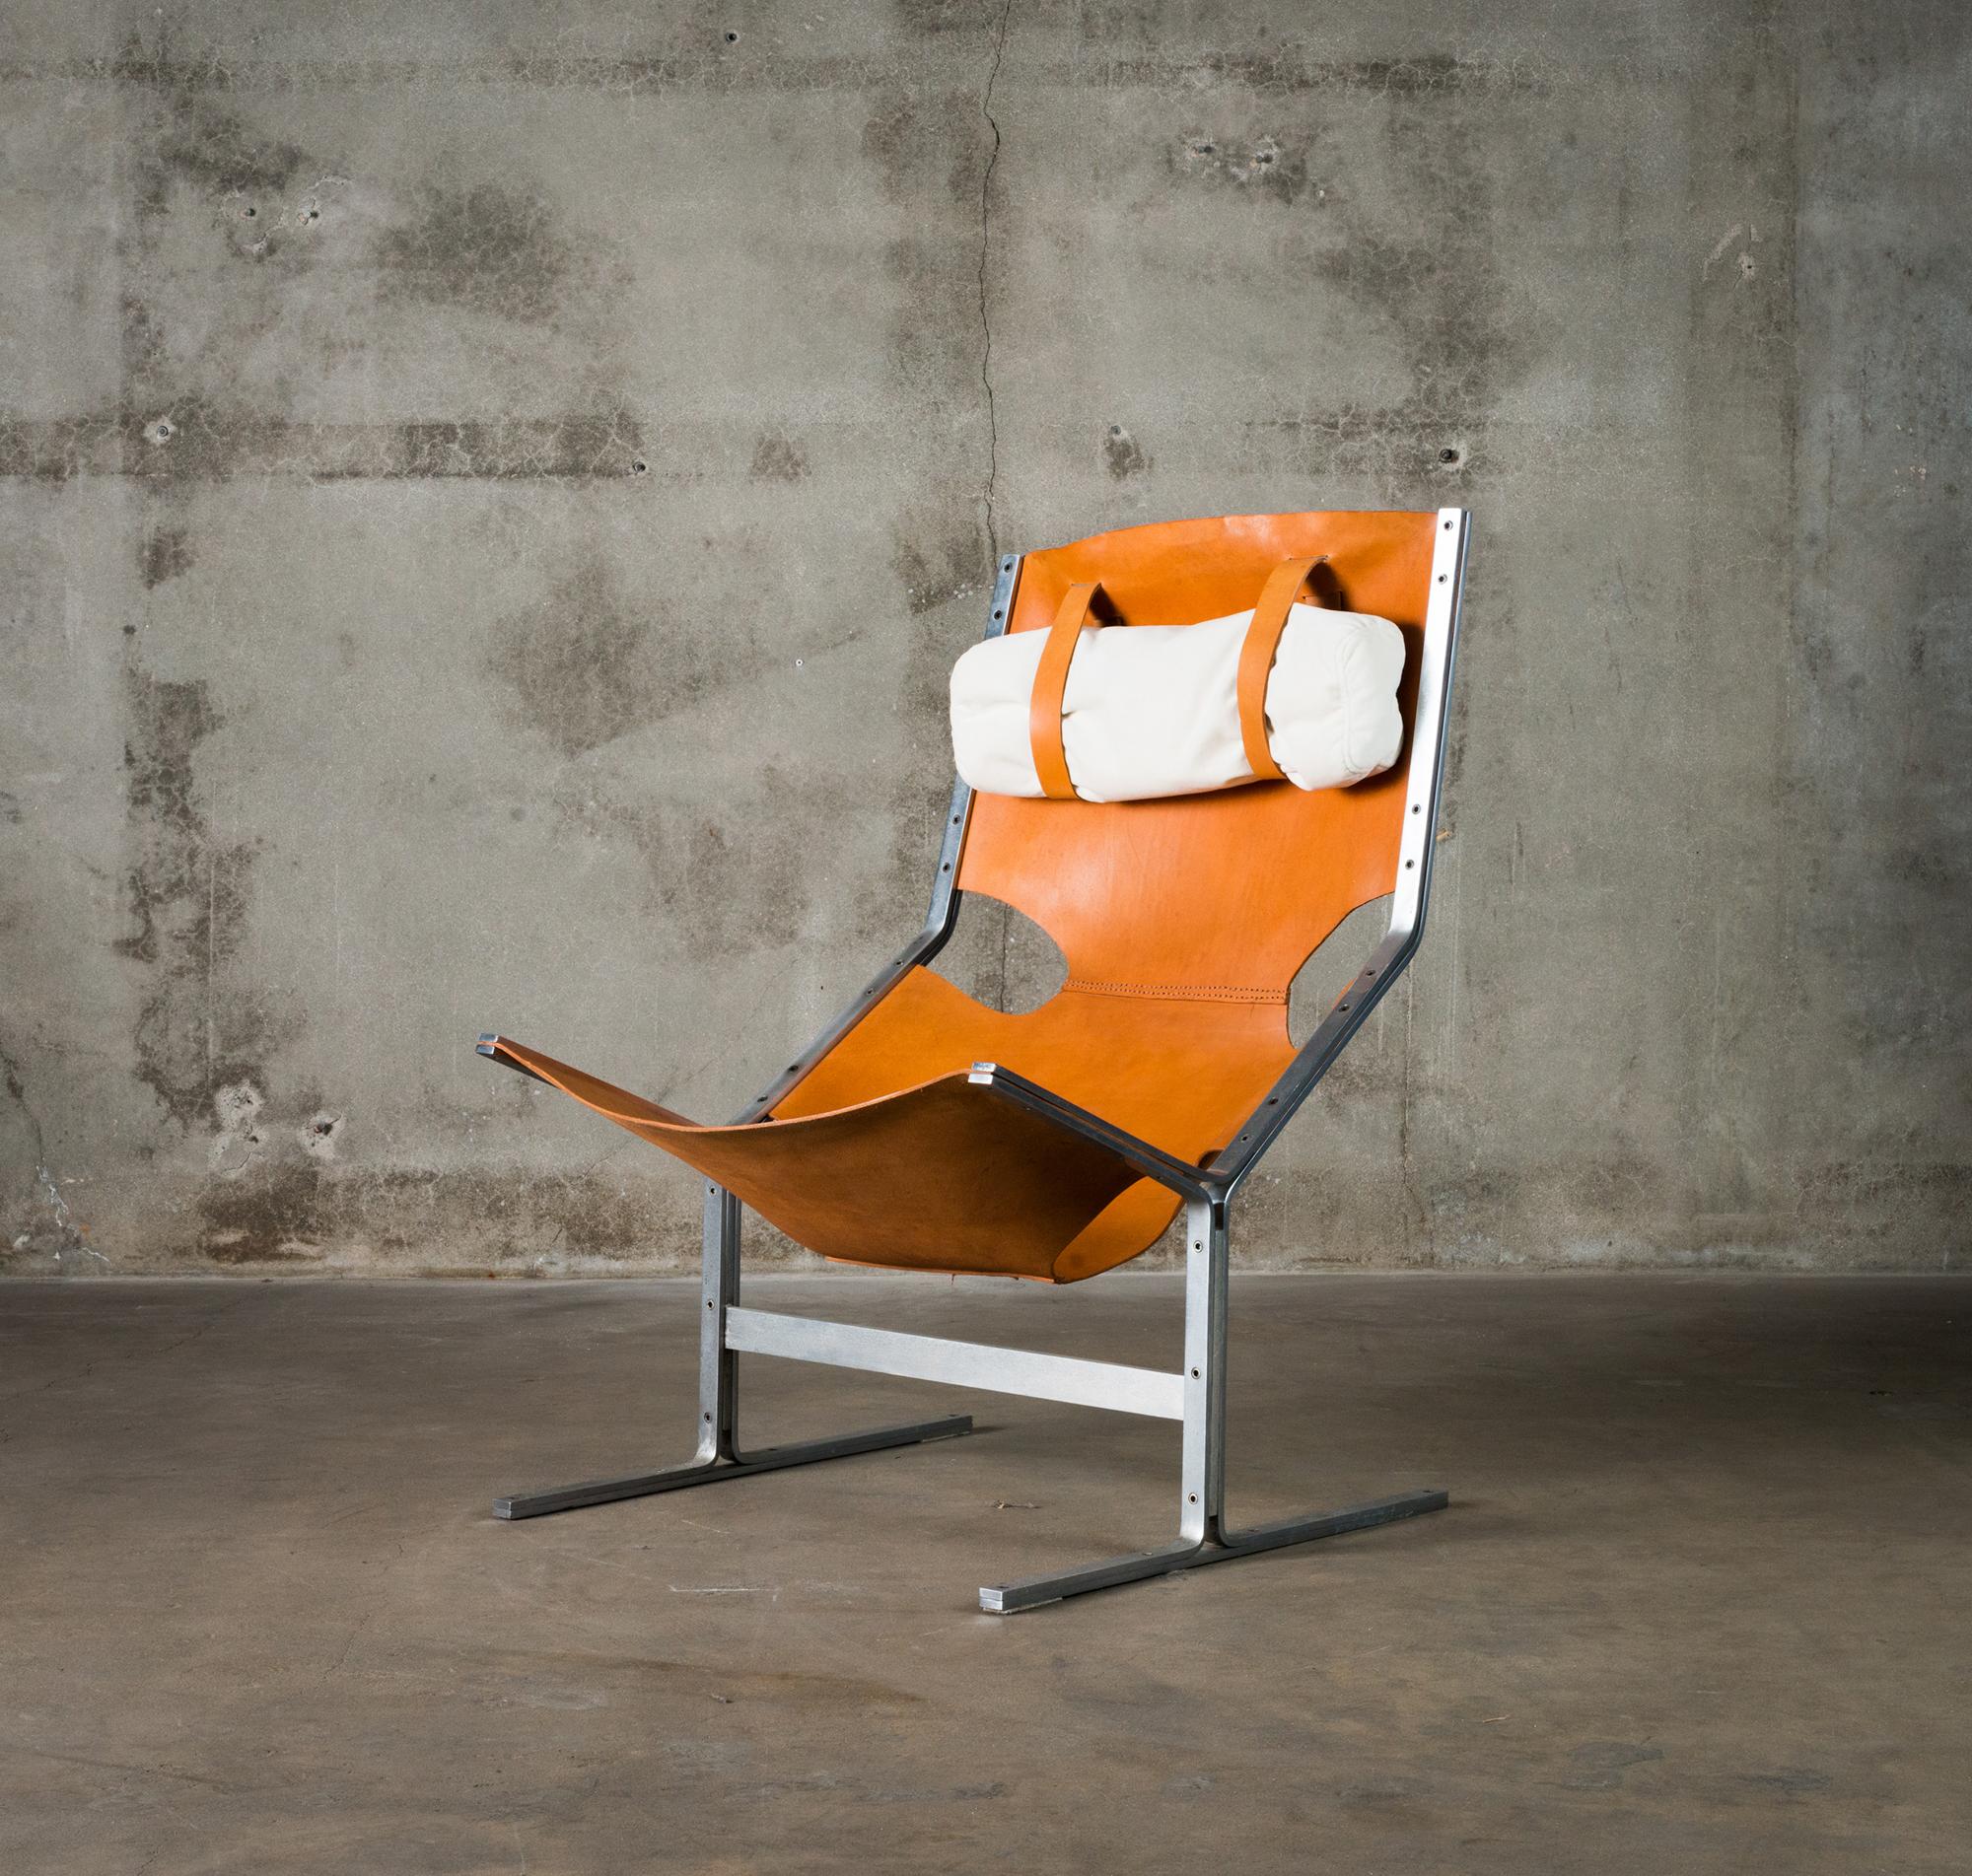 Leather sling lounge chair by A. Polak, Netherlands, 1958.